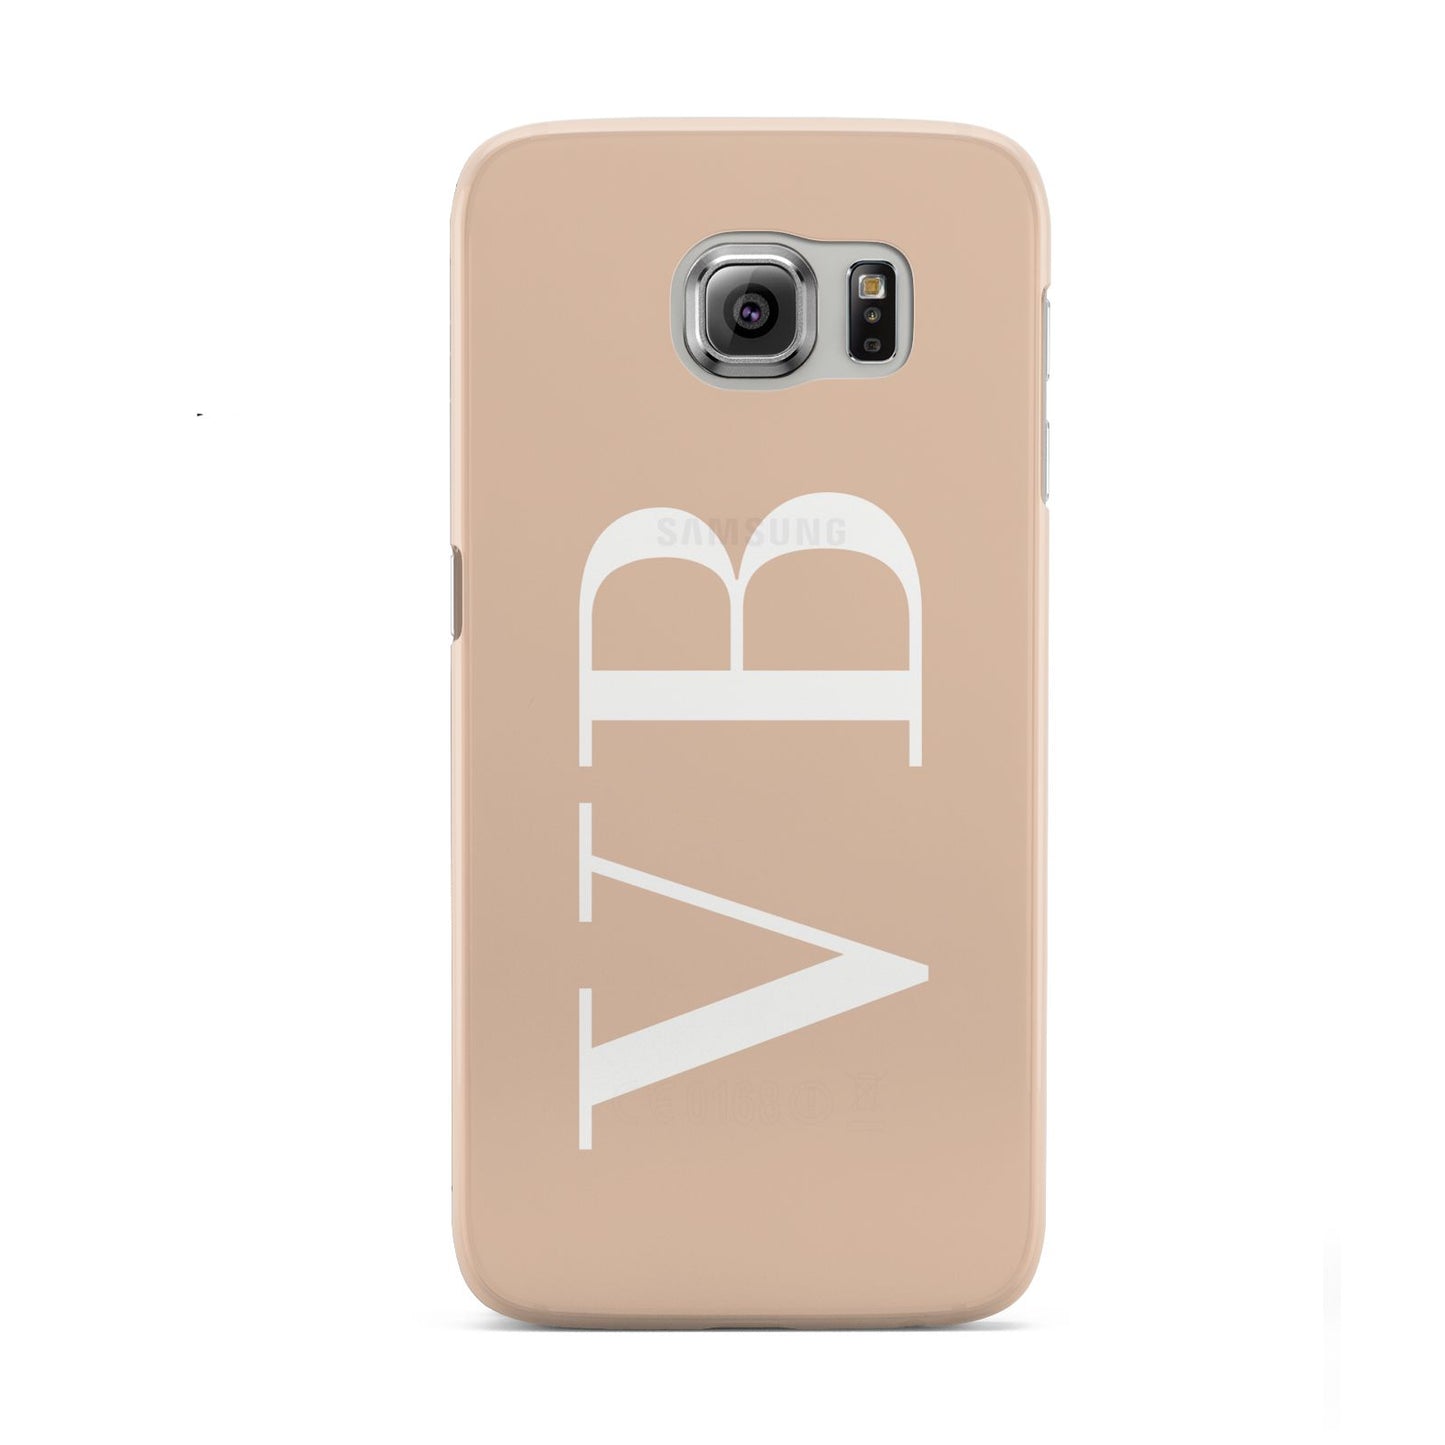 Nude And White Personalised Samsung Galaxy S6 Case